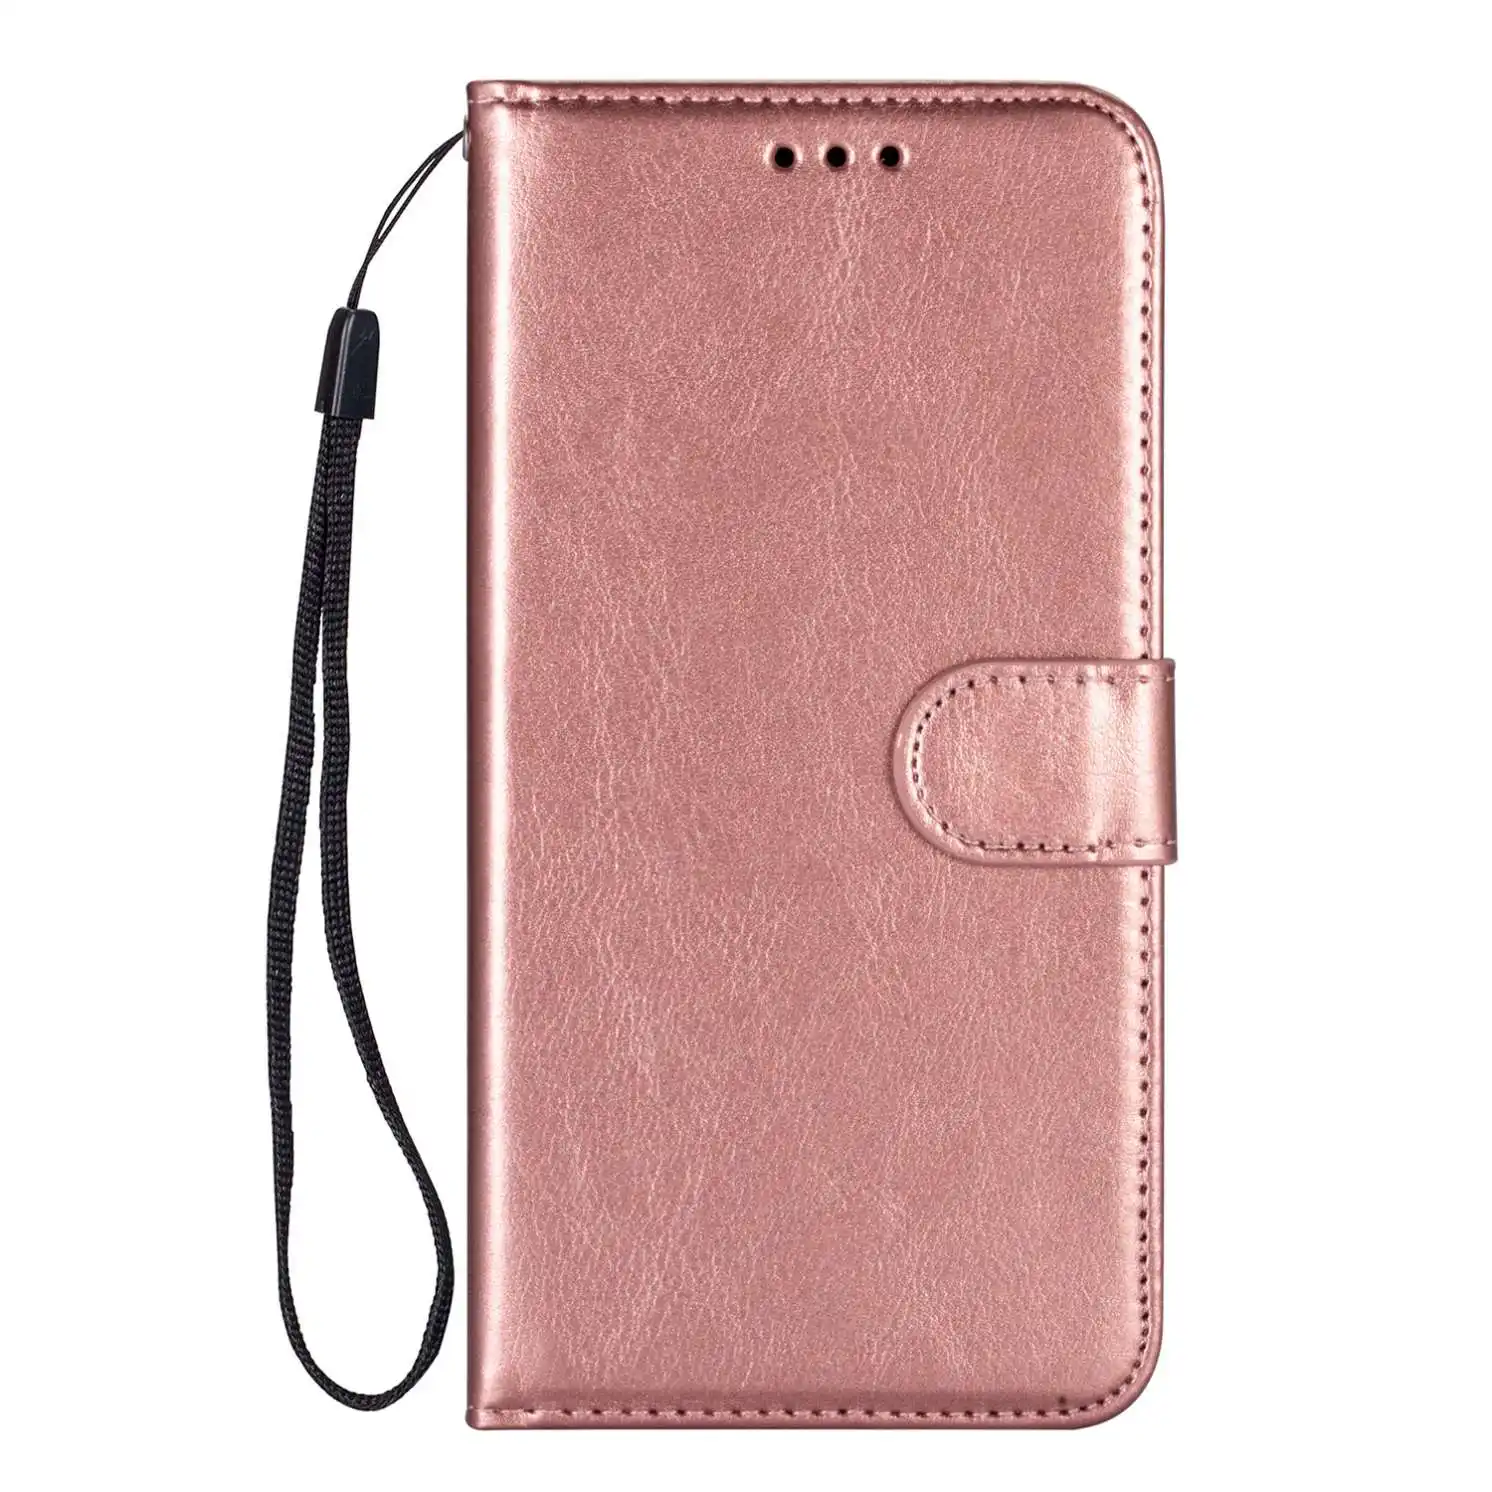 High Quality Credit Card Leather Case For iPhone 11promax Custom Cover Case for iphone 12 leather case for iphone 11promax